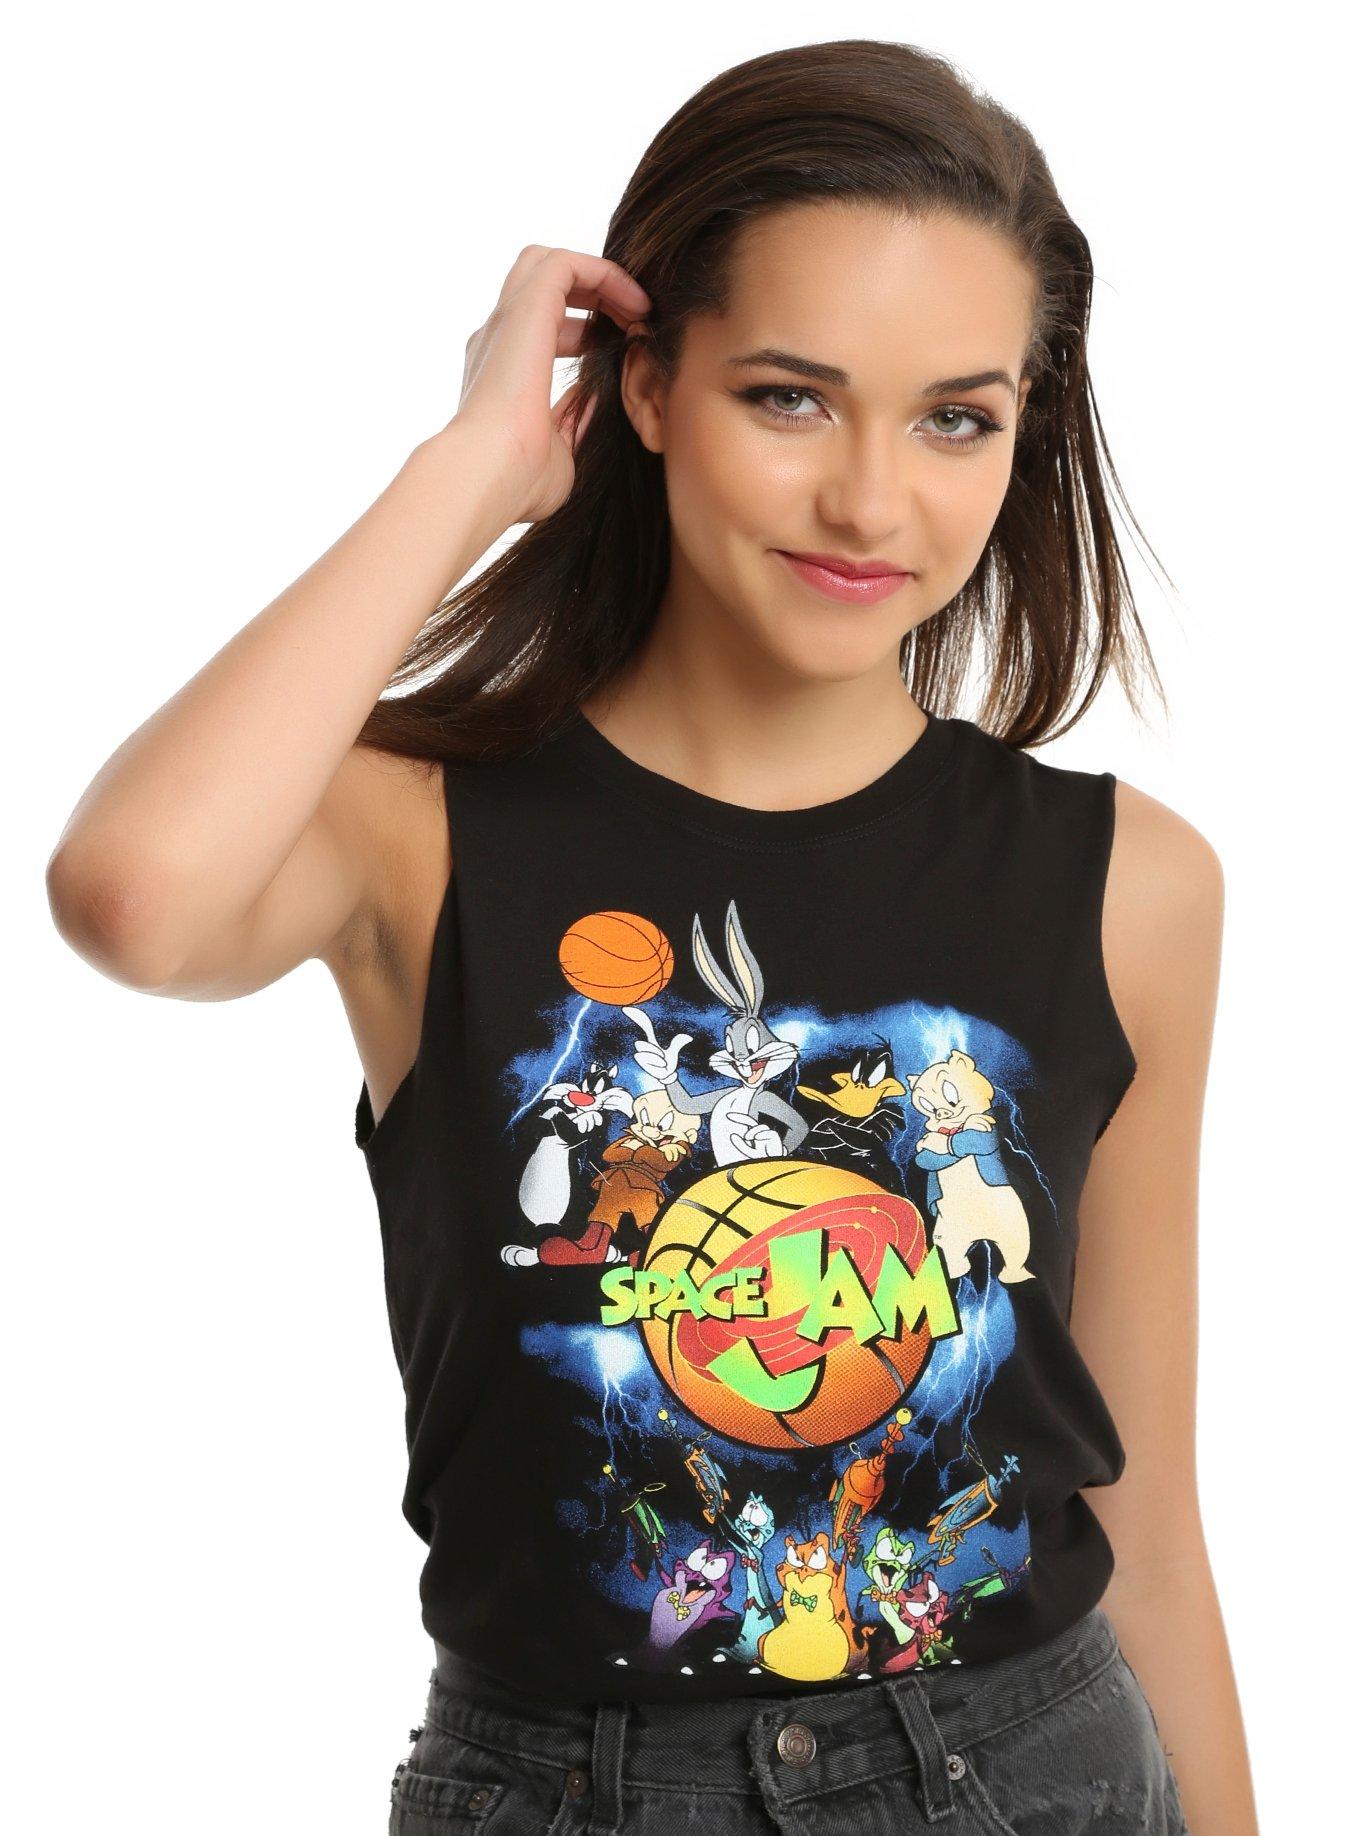 Space Jam Character Poster Girls Muscle Top, BLACK, hi-res